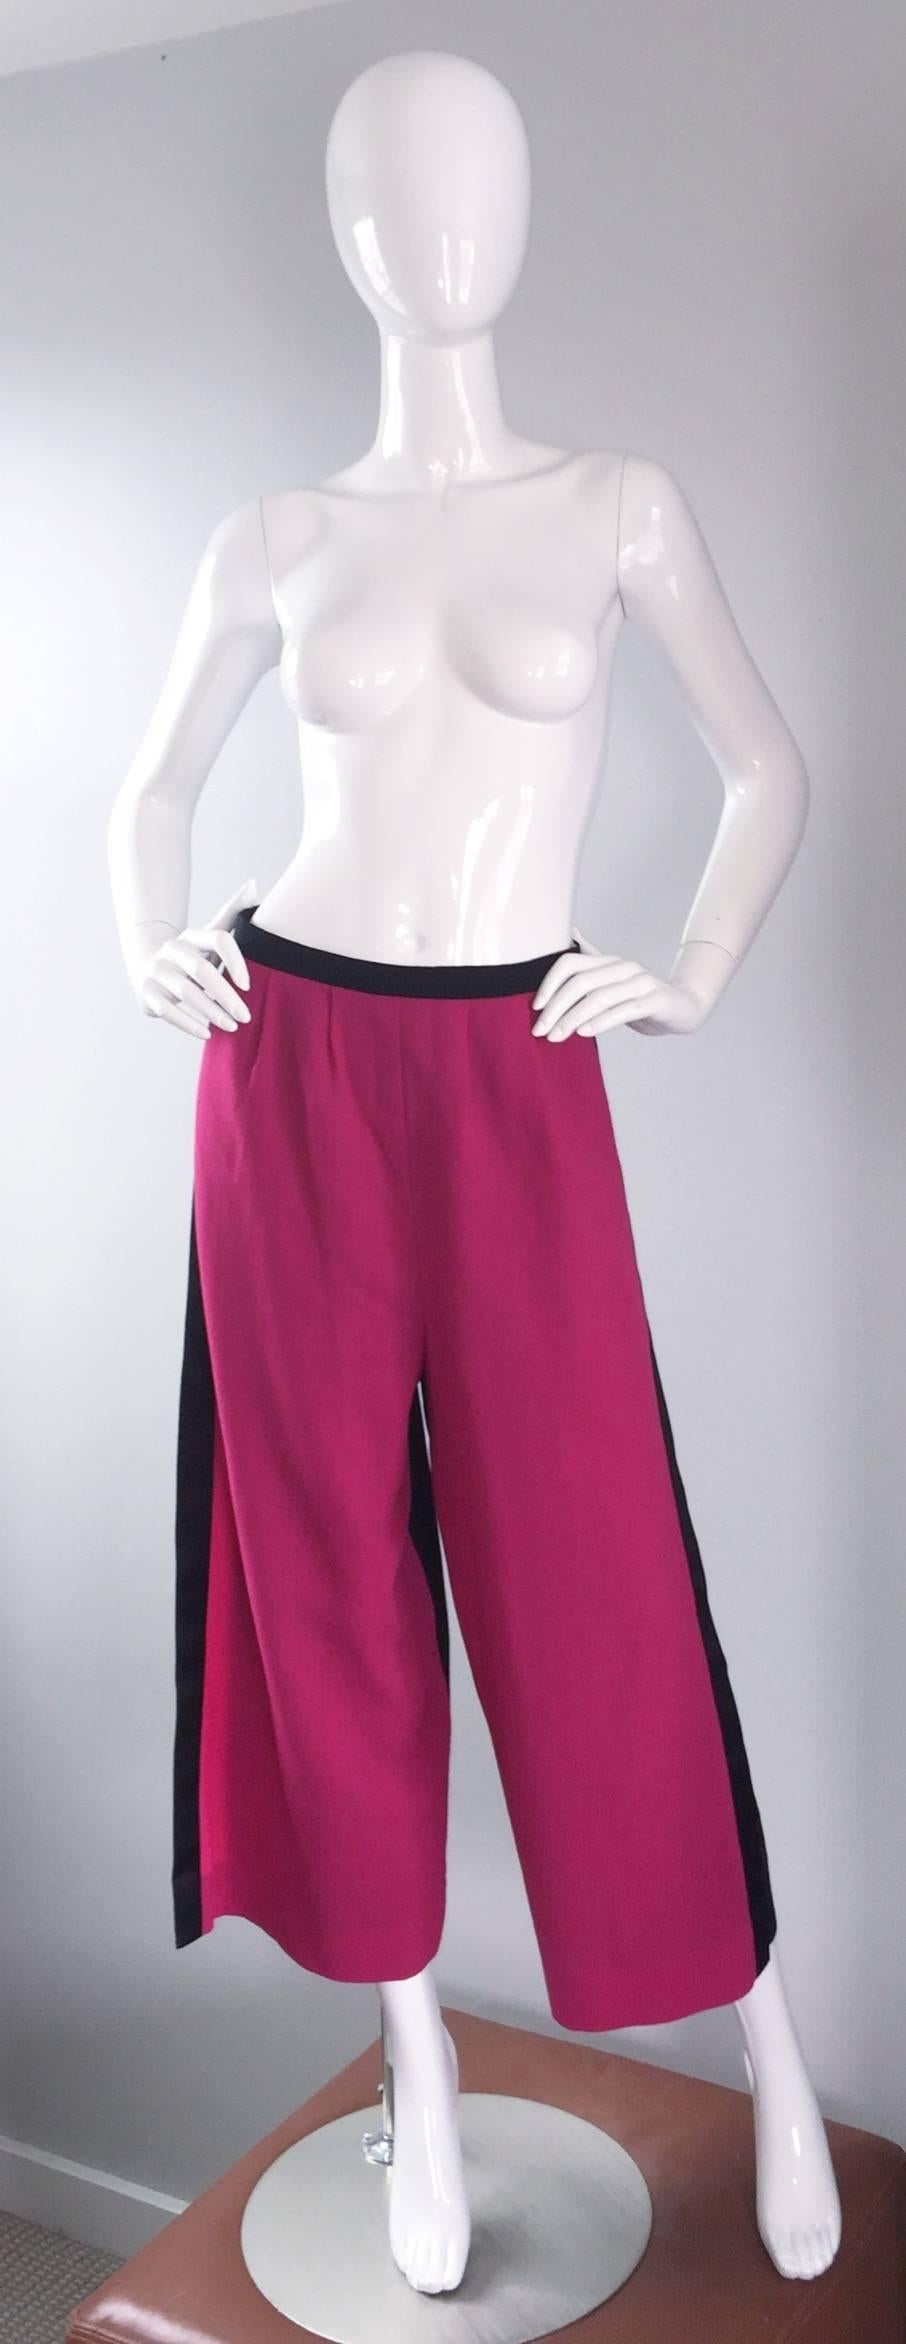 Amazing, and rare vintage James Galanos culottes/pants! Features fuchsia/pink front, with black back. Draped pink wool overlay. Chic wide legs. Looks great on! Perfect with a tank, blouse, or sweater. Couture quality, with hand sewn finishing.